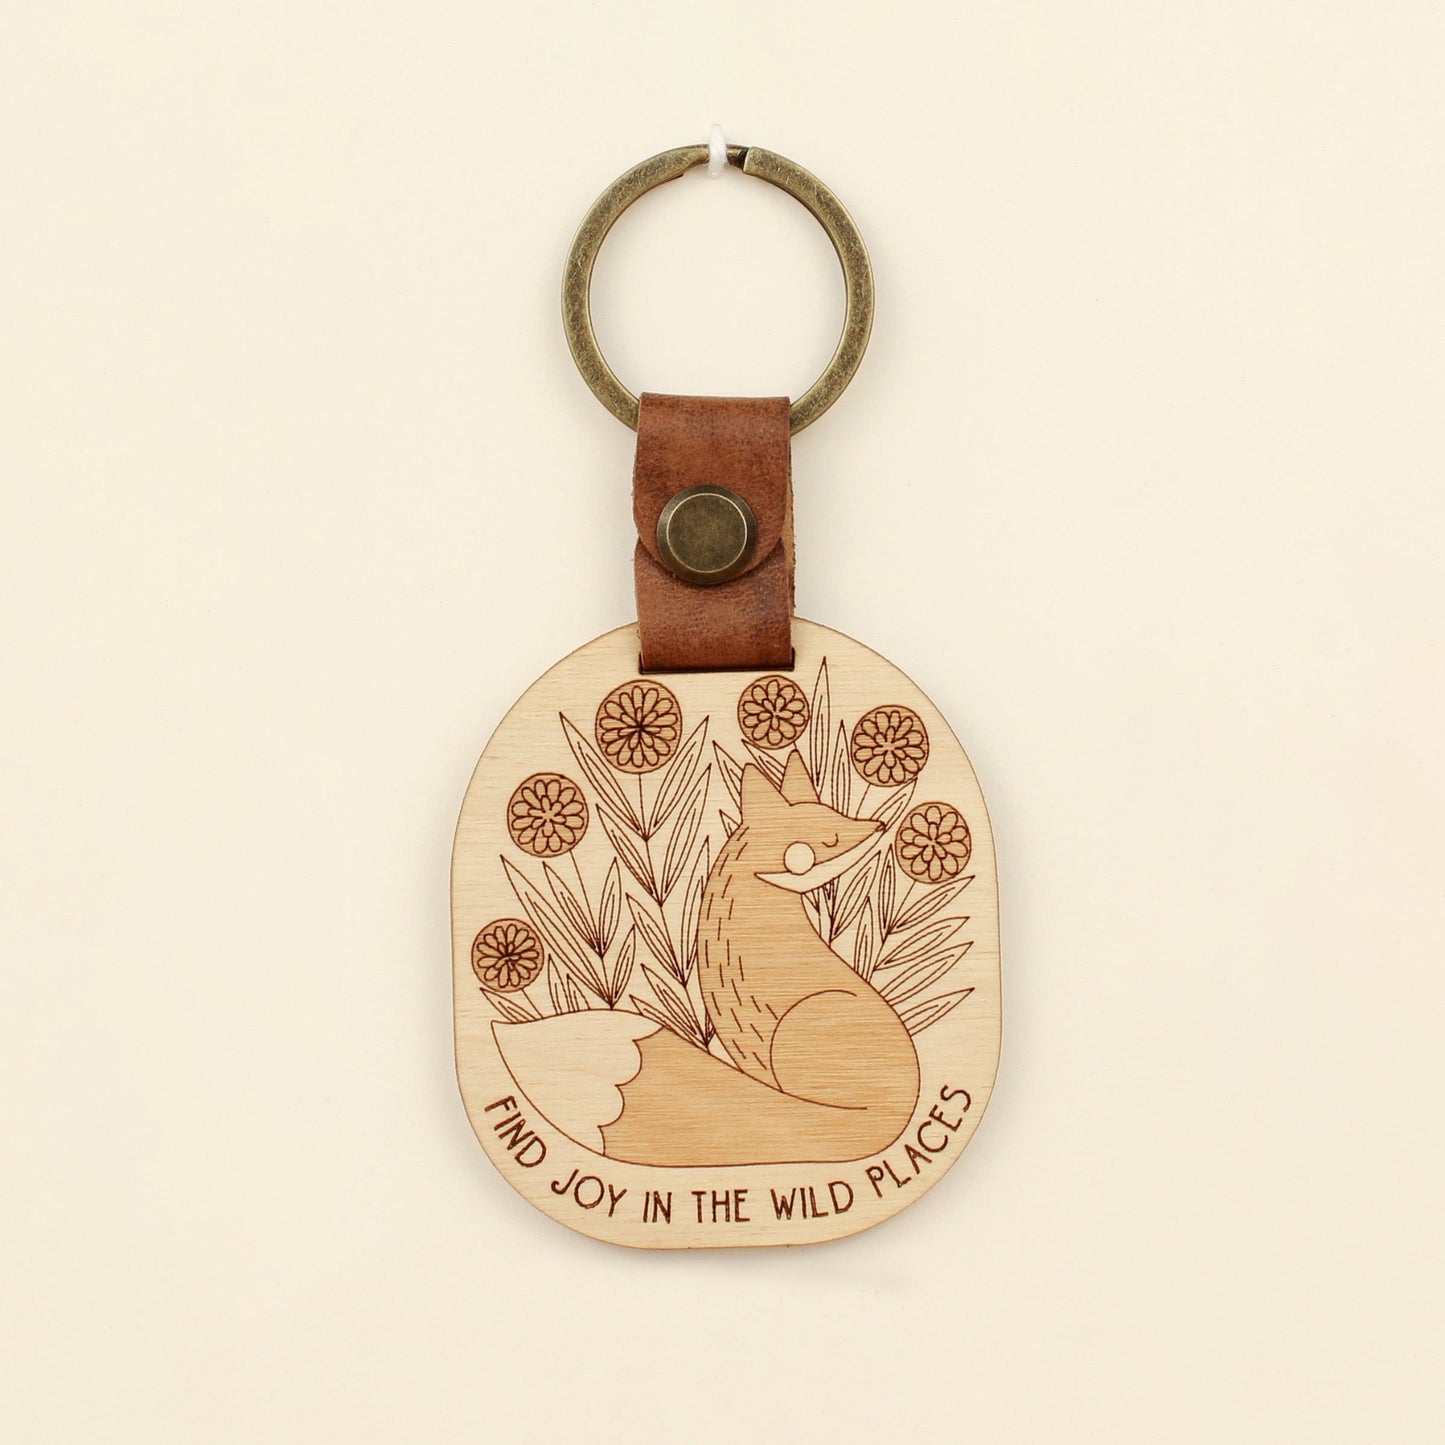 wooden keychain with fox design surrounded by flowers and the text 'find joy in the wild places.' with leather strap and bronze colored details.